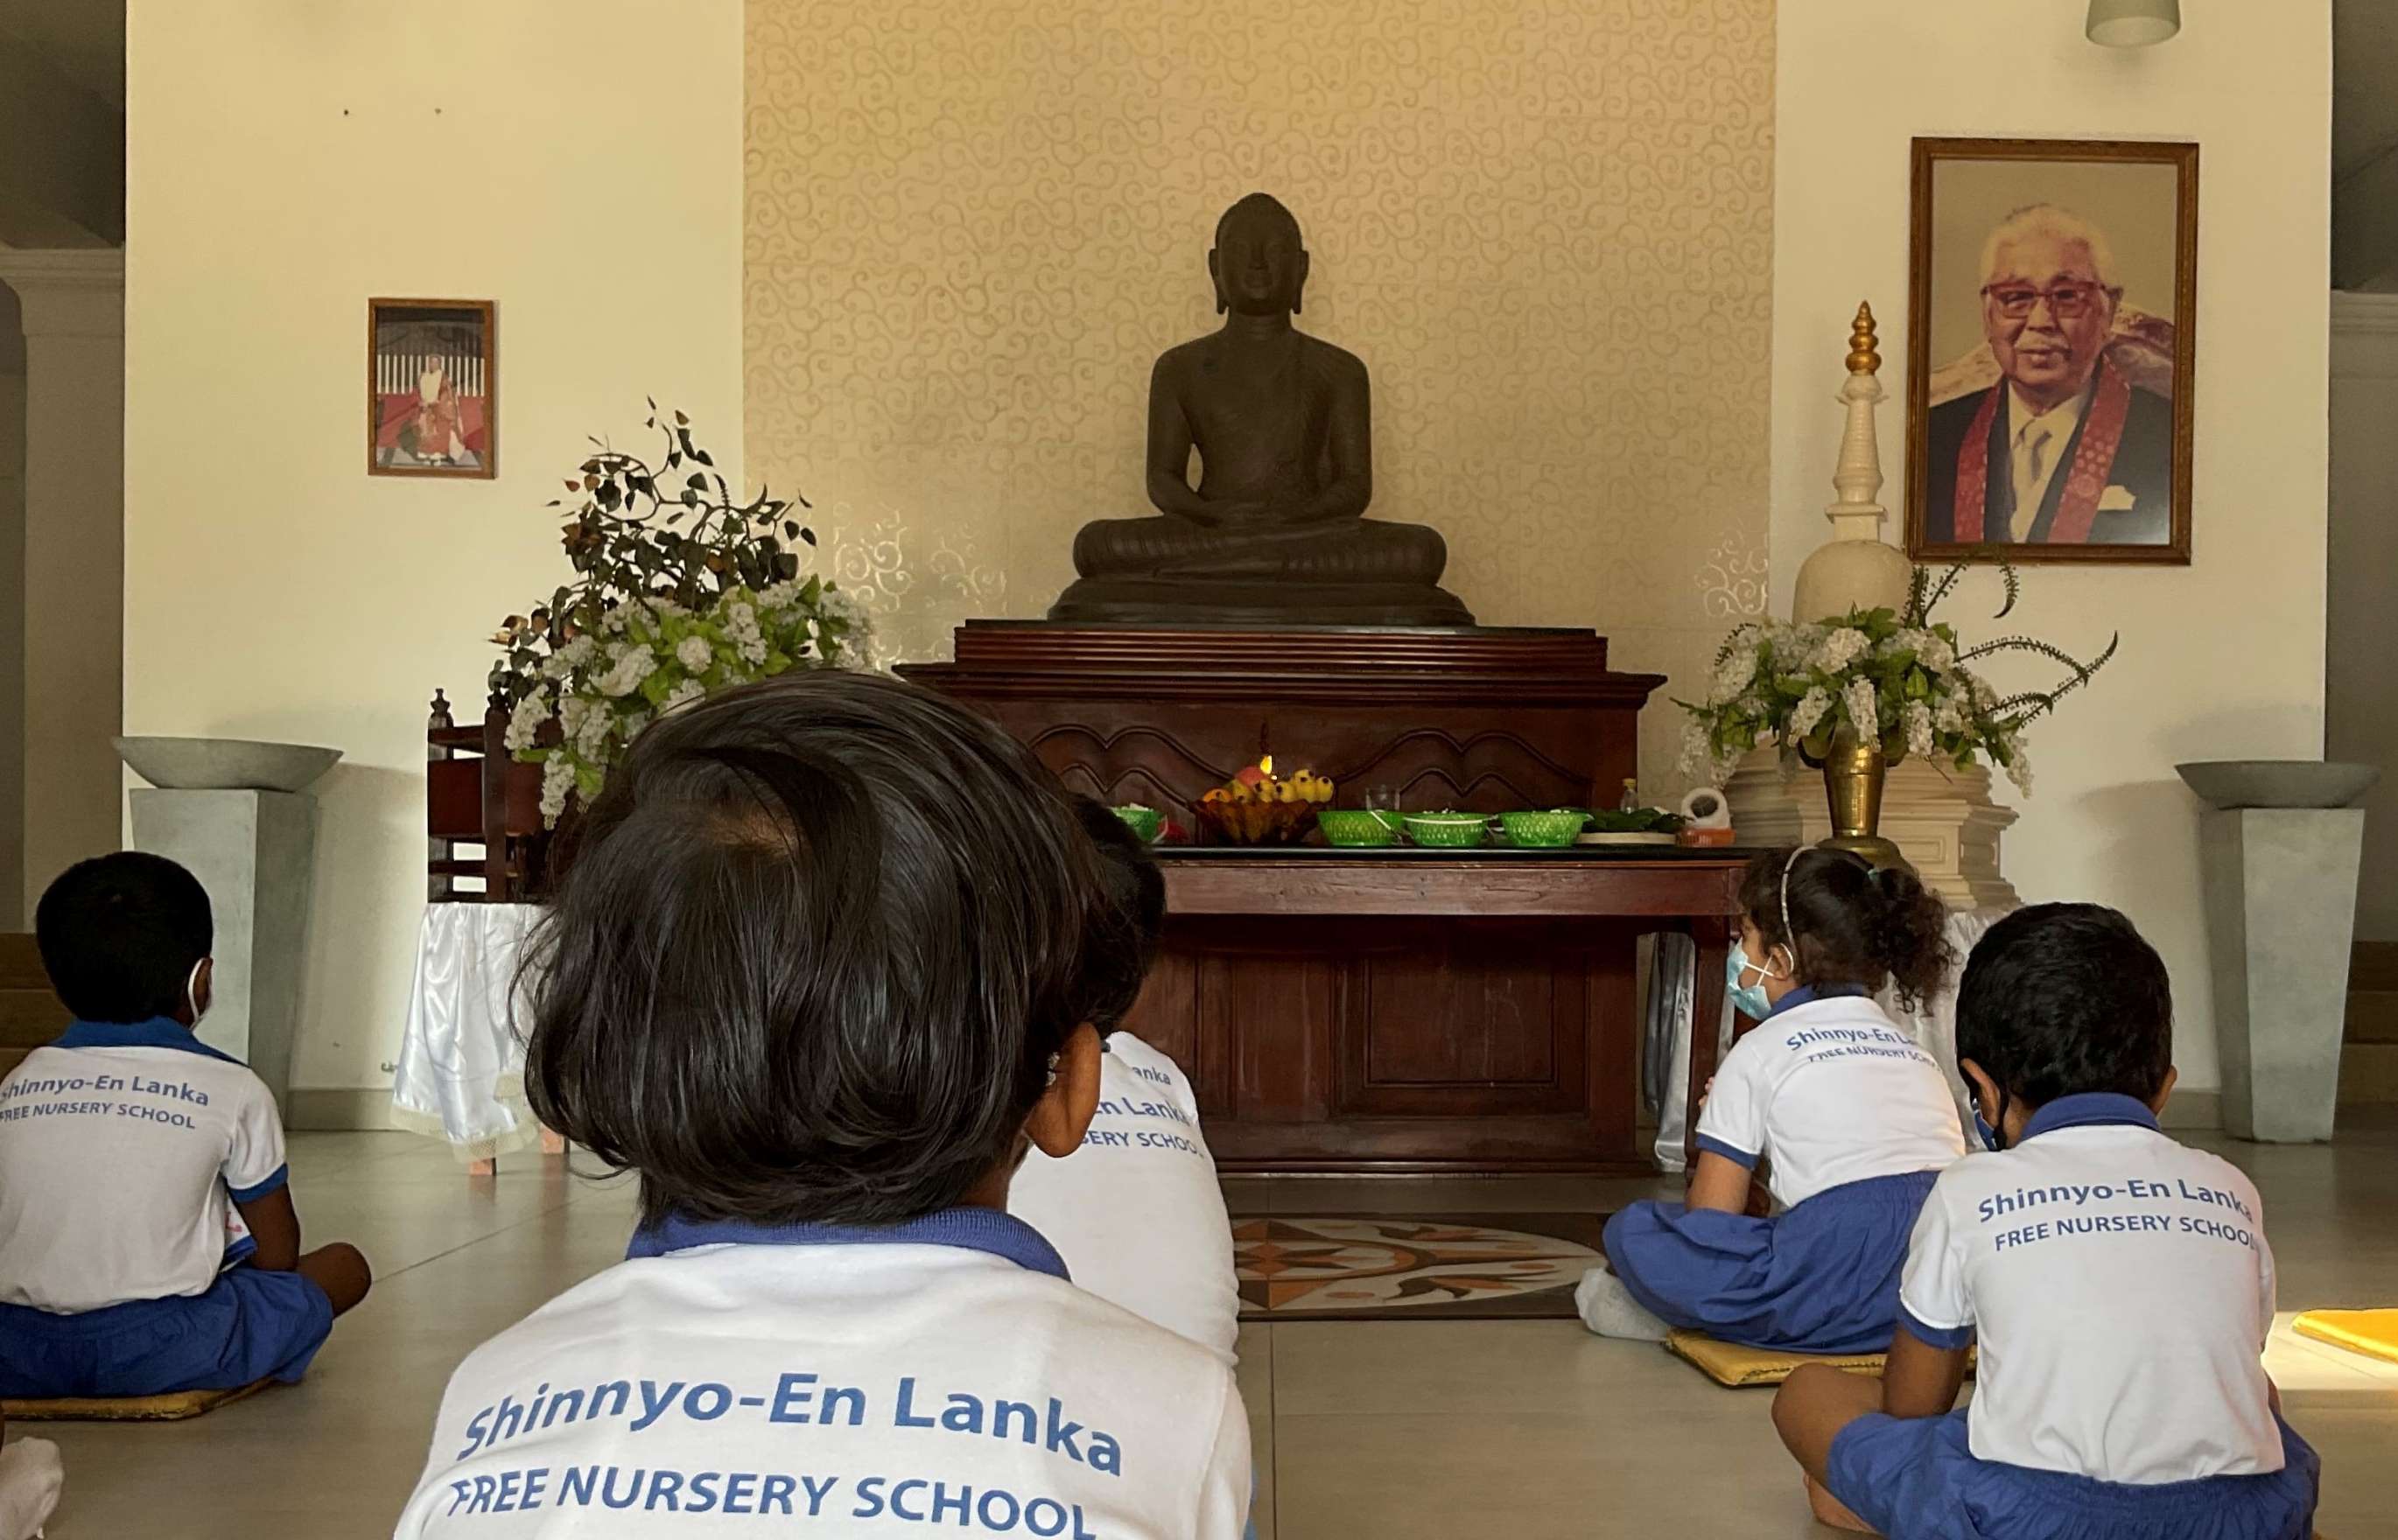 A group of children wearing blue shorts and tee-shirts with the words “Shinnyo-en Lanka Nursery School” printed on them sit mindfully in front of a statue of Buddha.